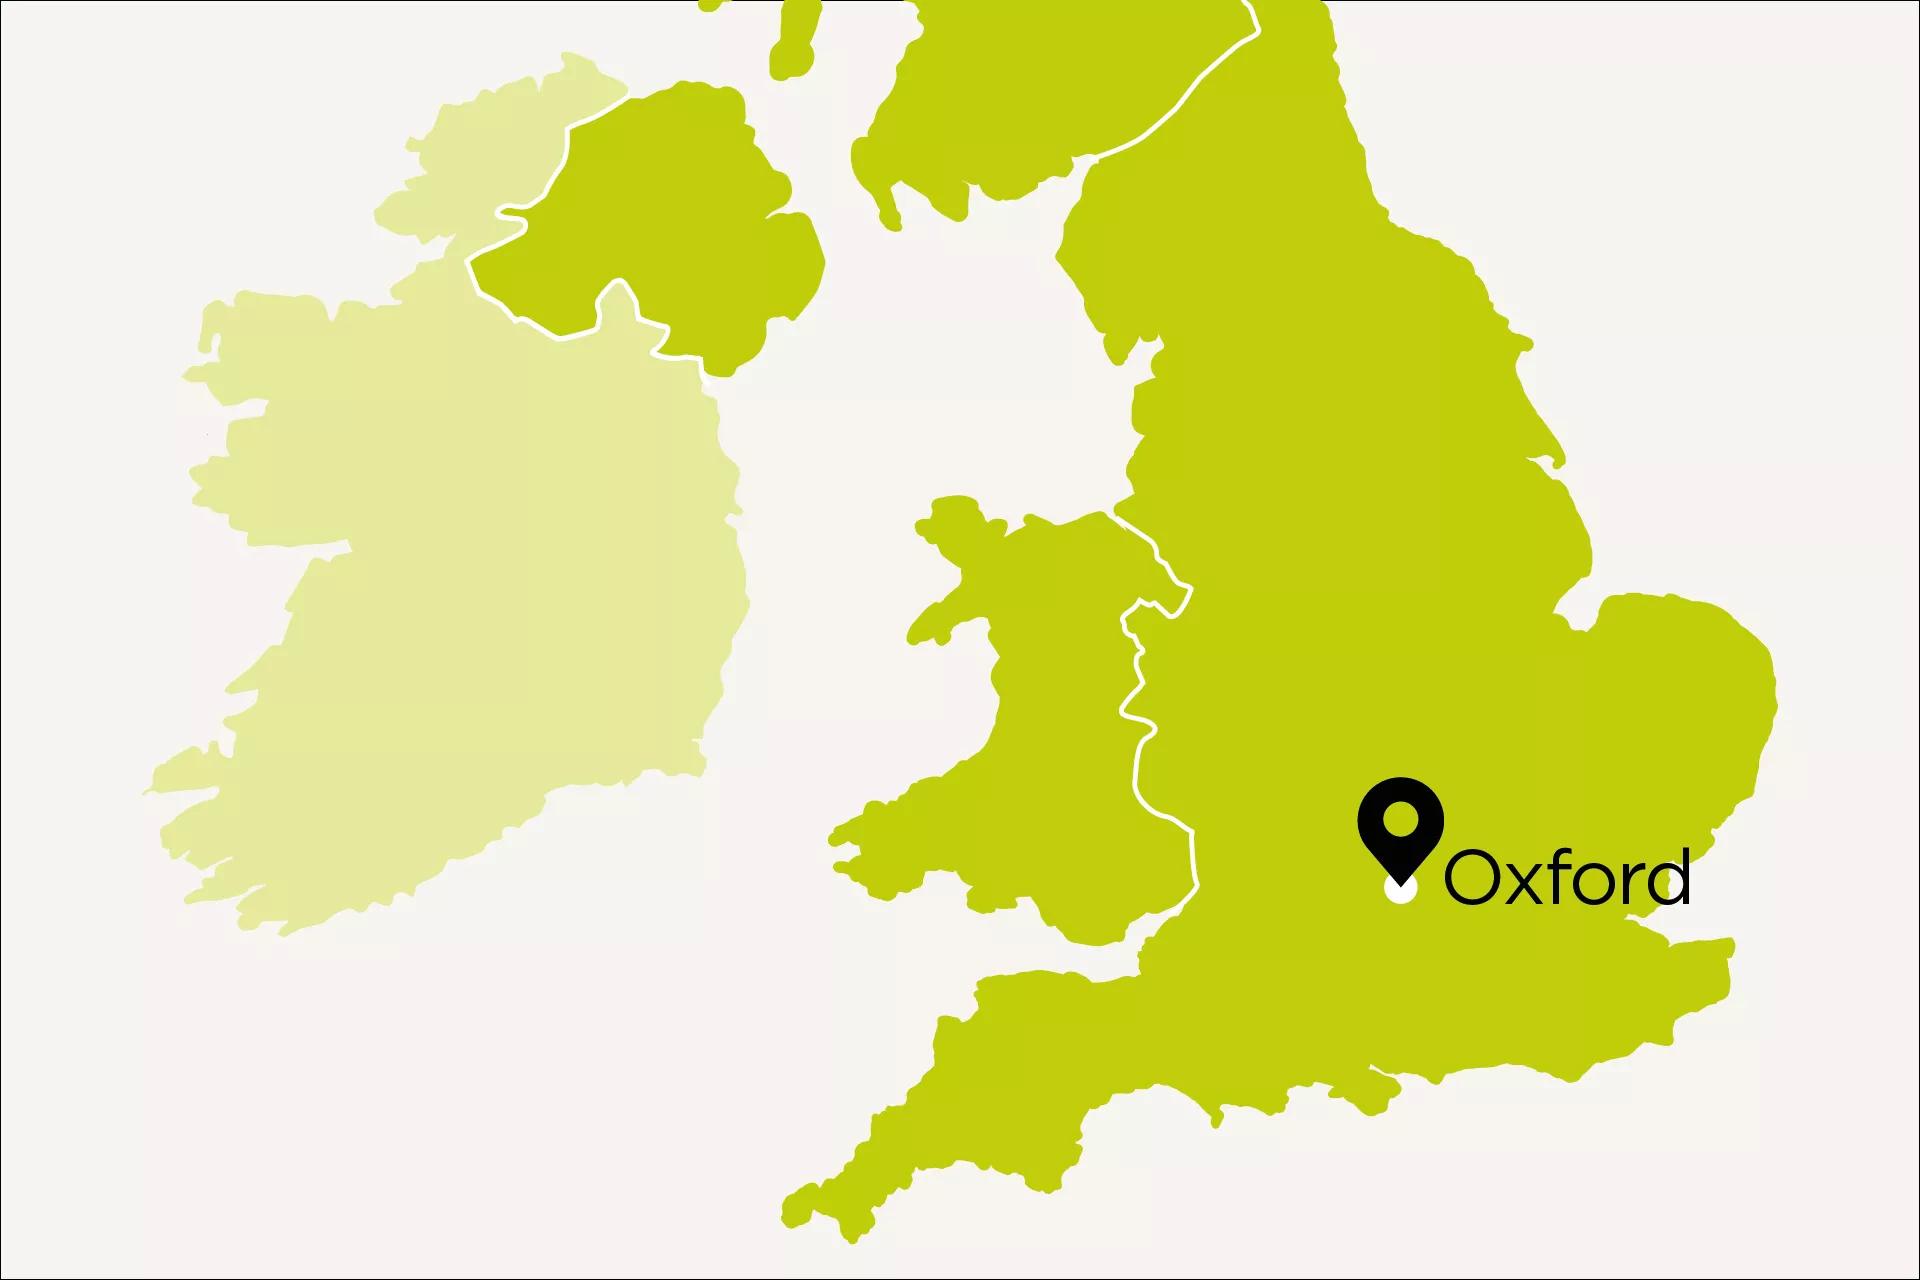 Map of UK with Oxford pinpoint